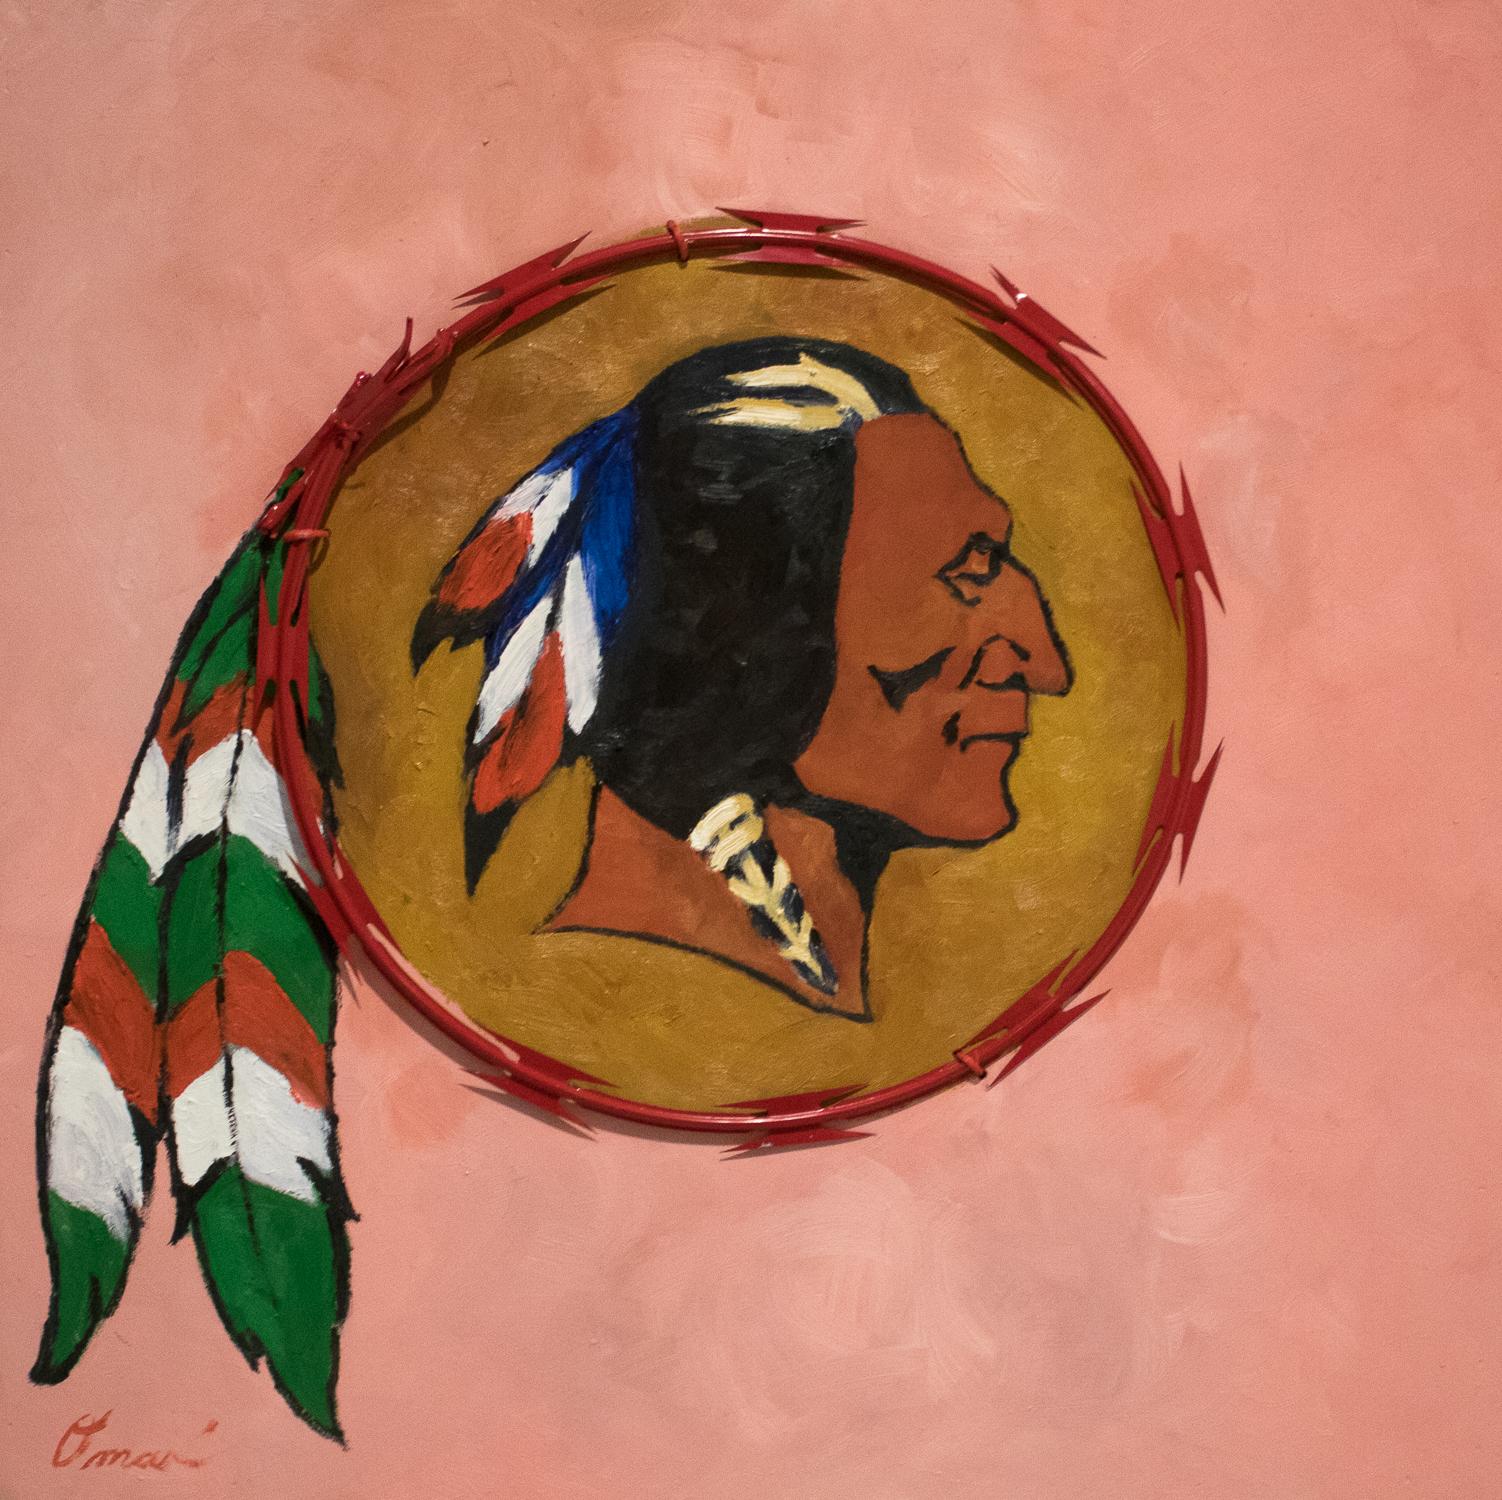 REDSKIN - contemporary political painting, pink, red razor wire, native chief - Mixed Media Art by Omari Booker